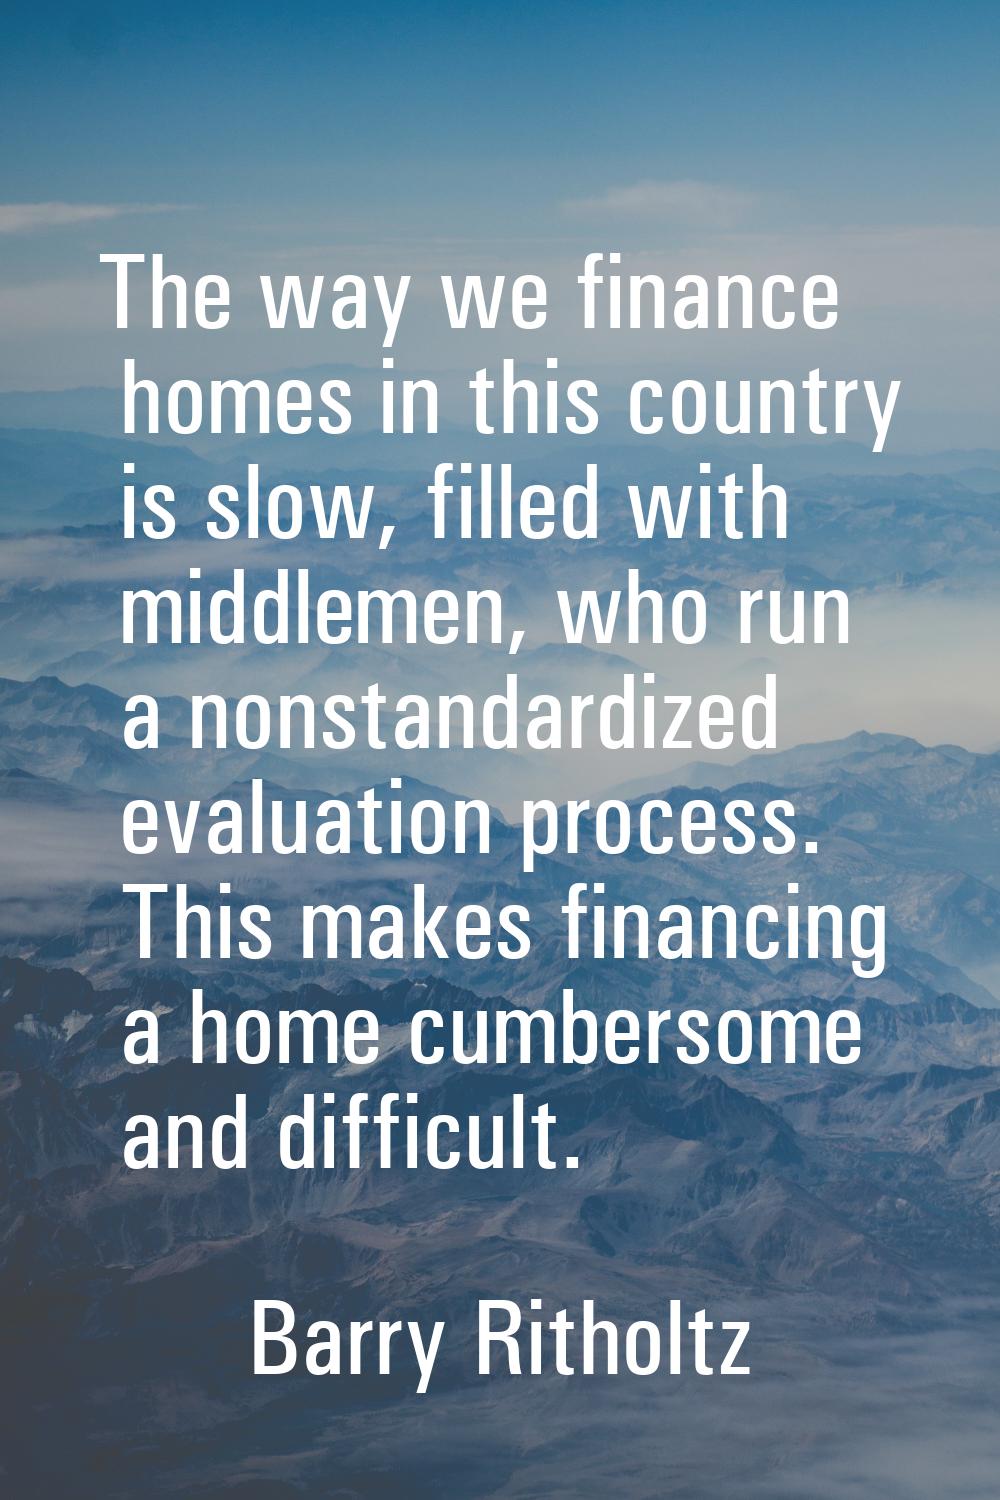 The way we finance homes in this country is slow, filled with middlemen, who run a nonstandardized 